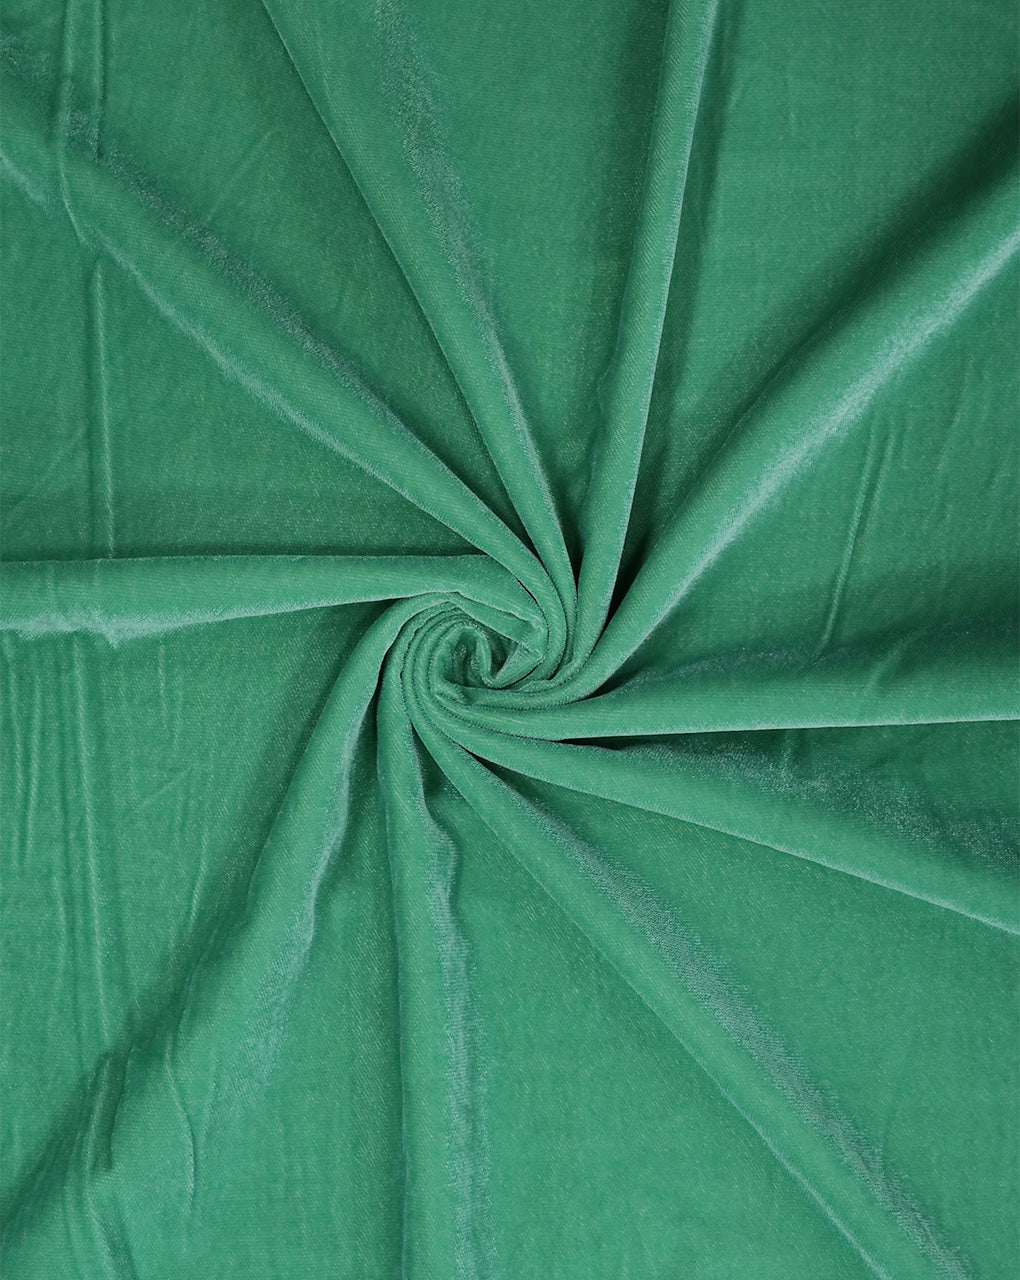 GREEN PLAIN POLYESTER MICRO VELVET FABRIC ( WIDTH 58 INCHES )